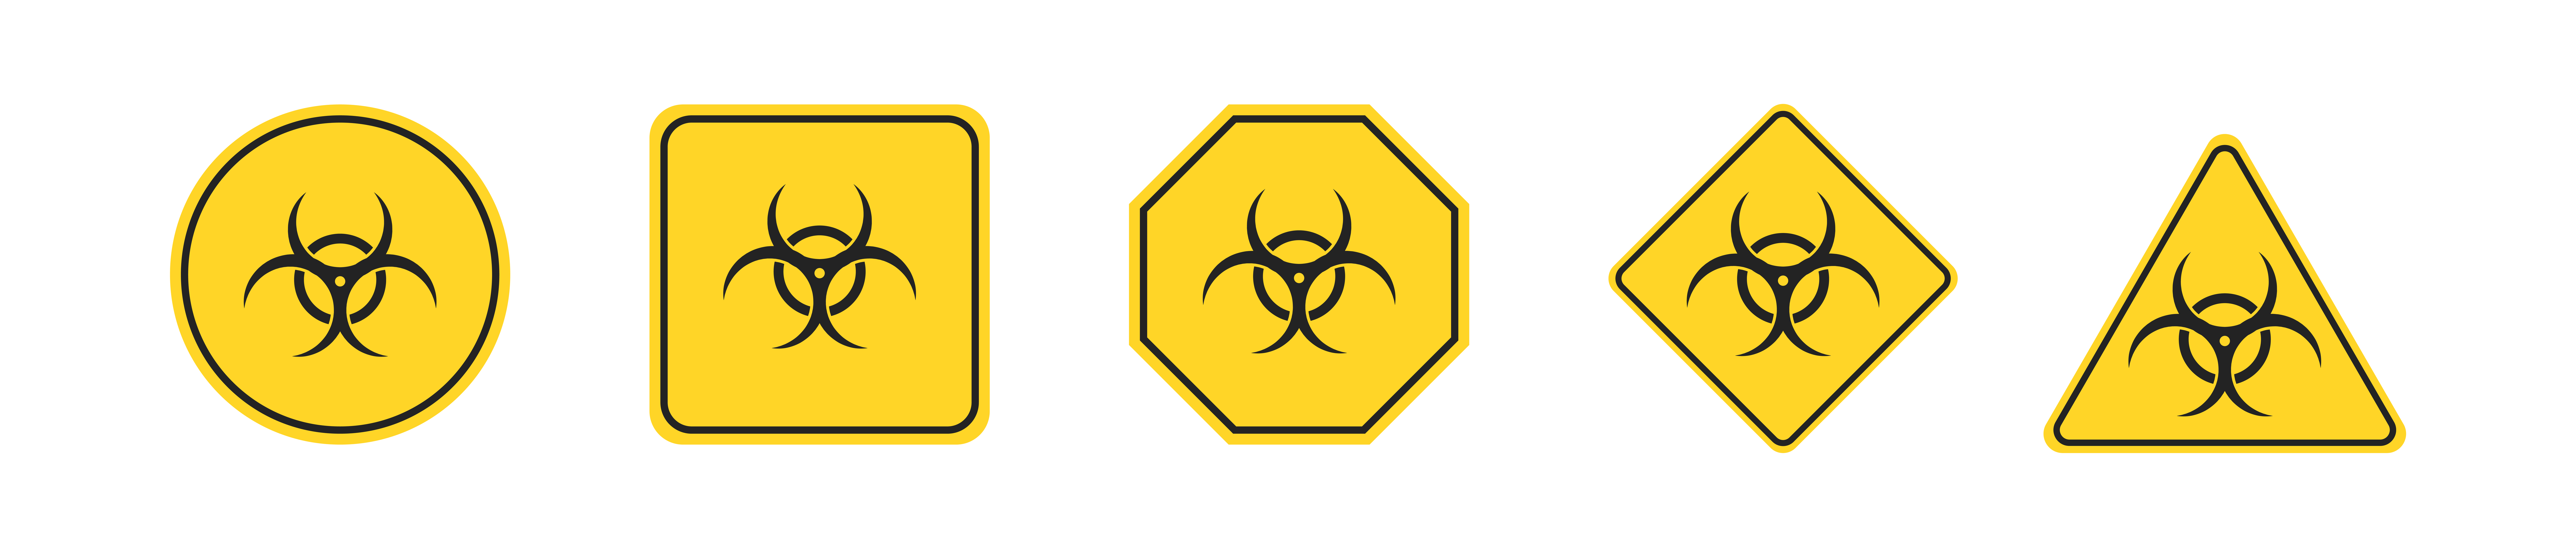 Danger warning icons set in flat style.  Chemical hazard sign. Vector isolated